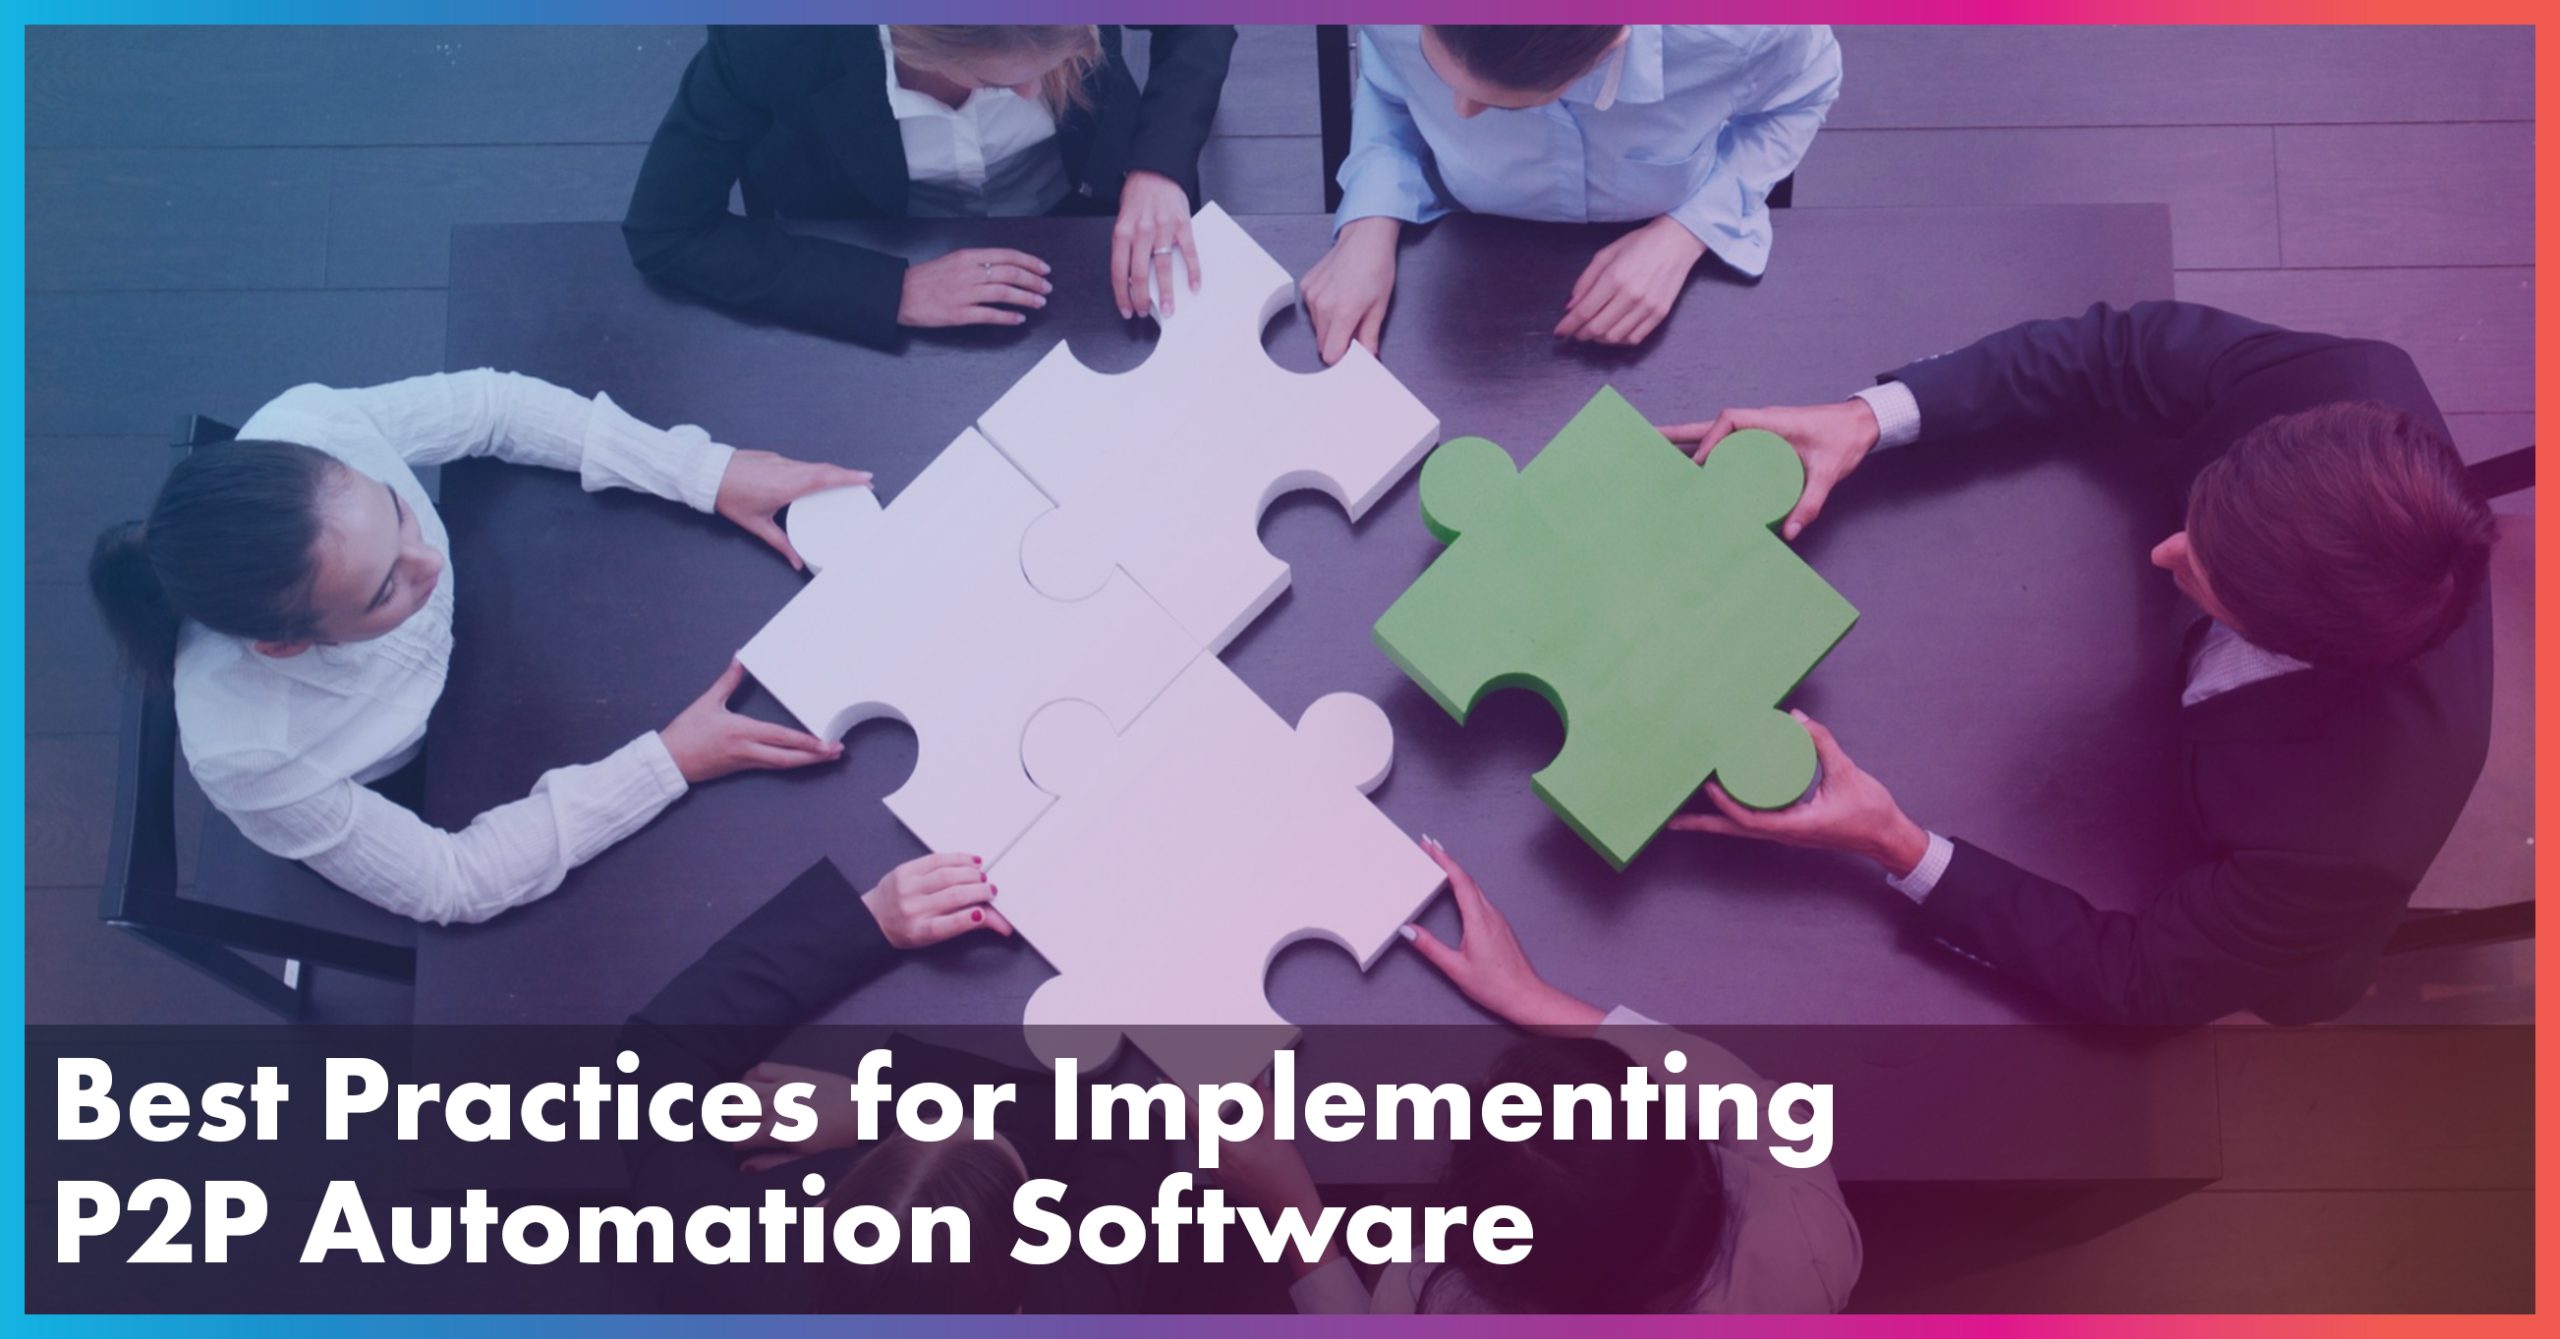 Best Practices for Implementing P2P Automation Software